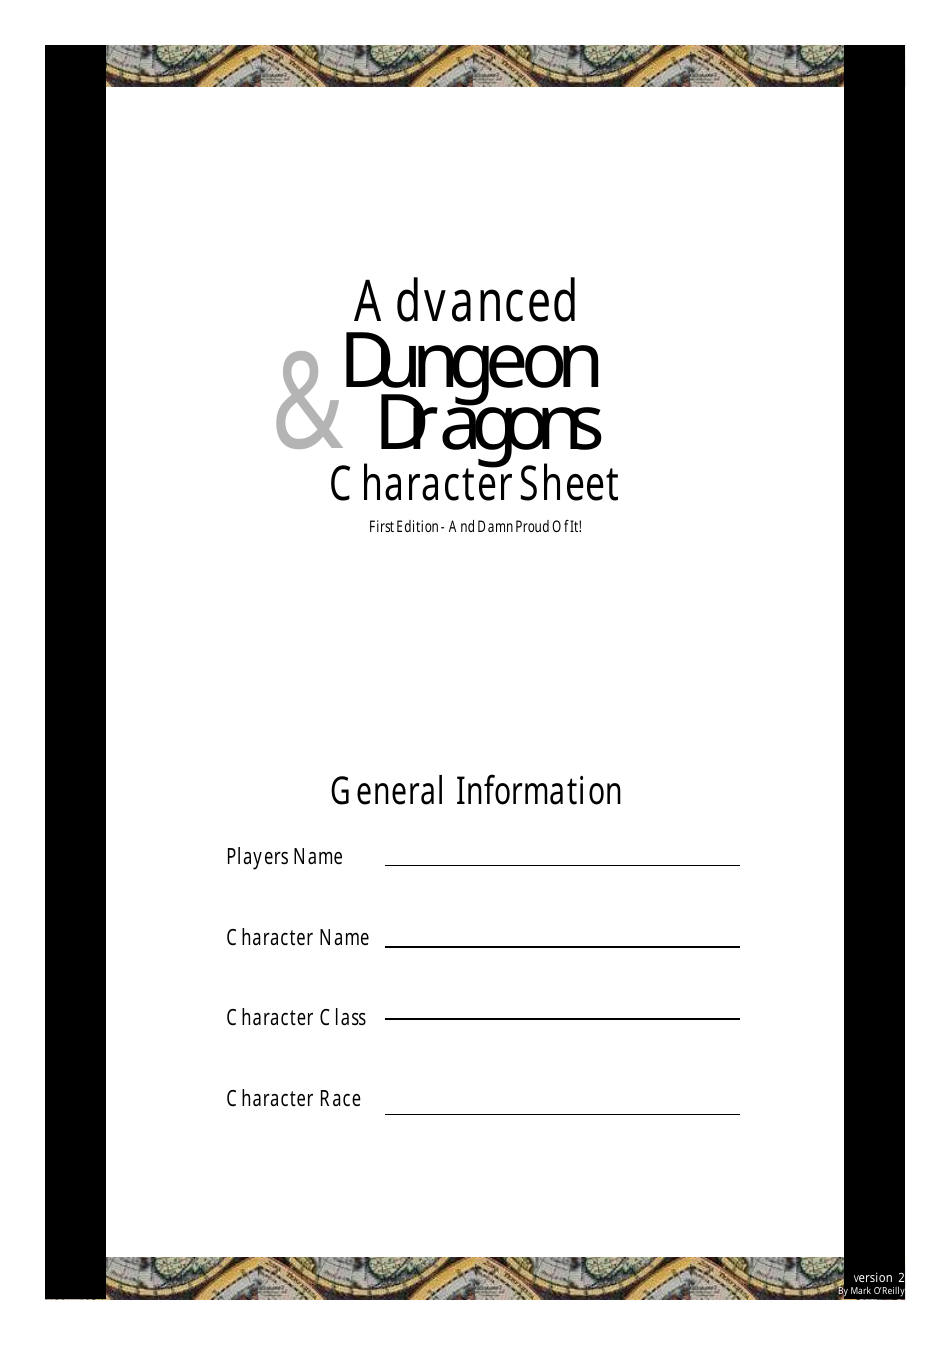 Advanced Dungeon & Dragons Character Sheet - Free customizable template